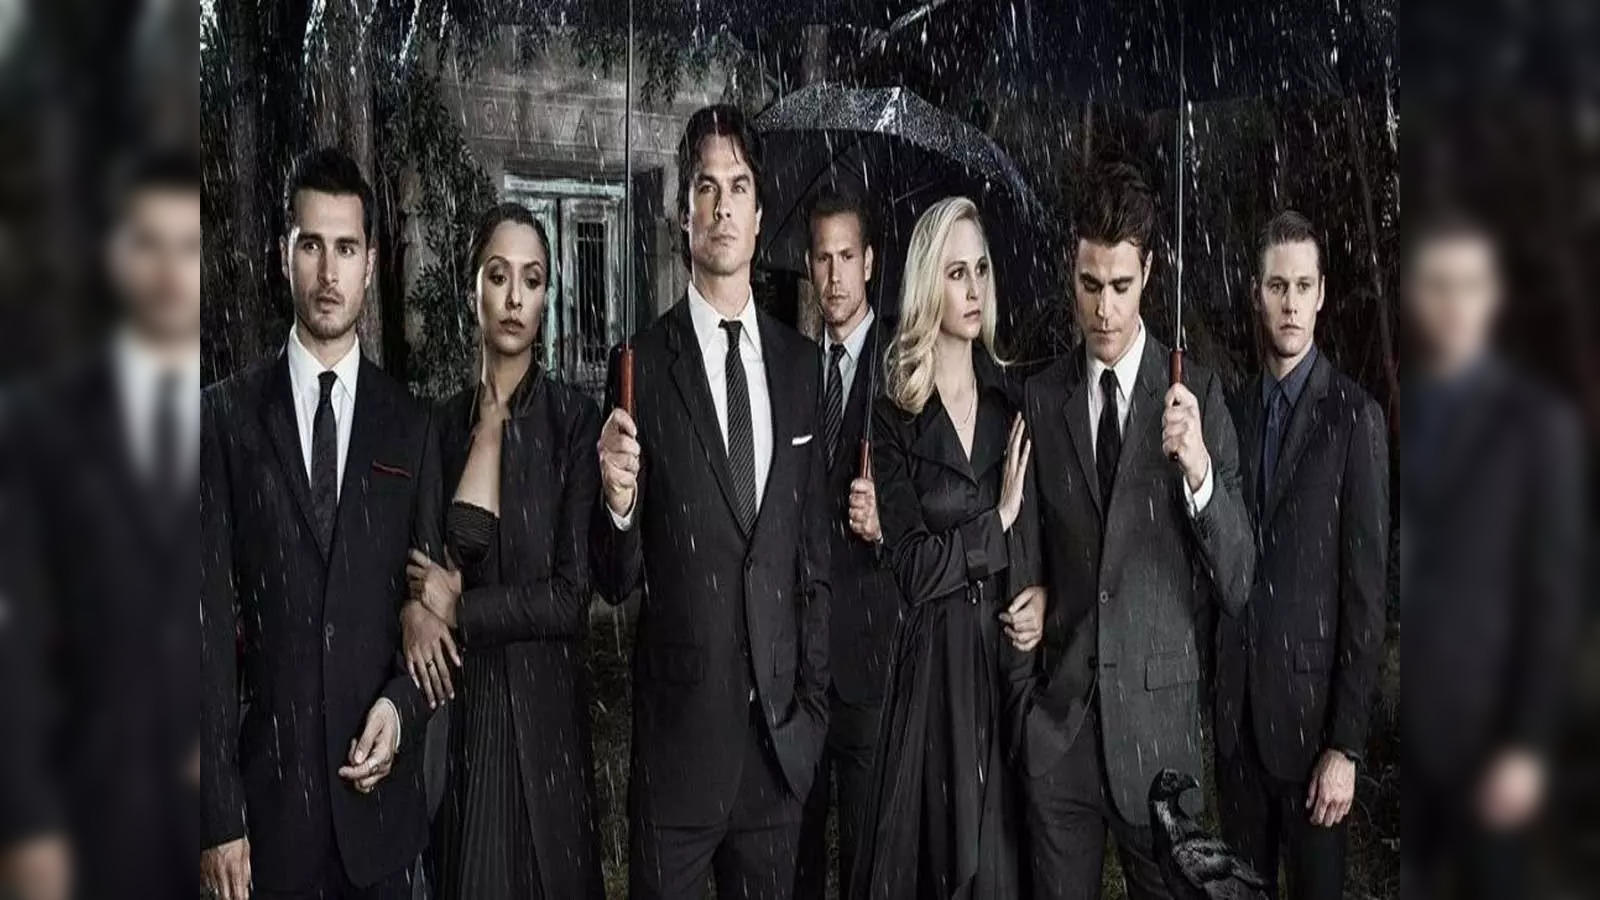 The vampire diaries: 'The Vampire Diaries' returning to Netflix. Key  details - The Economic Times